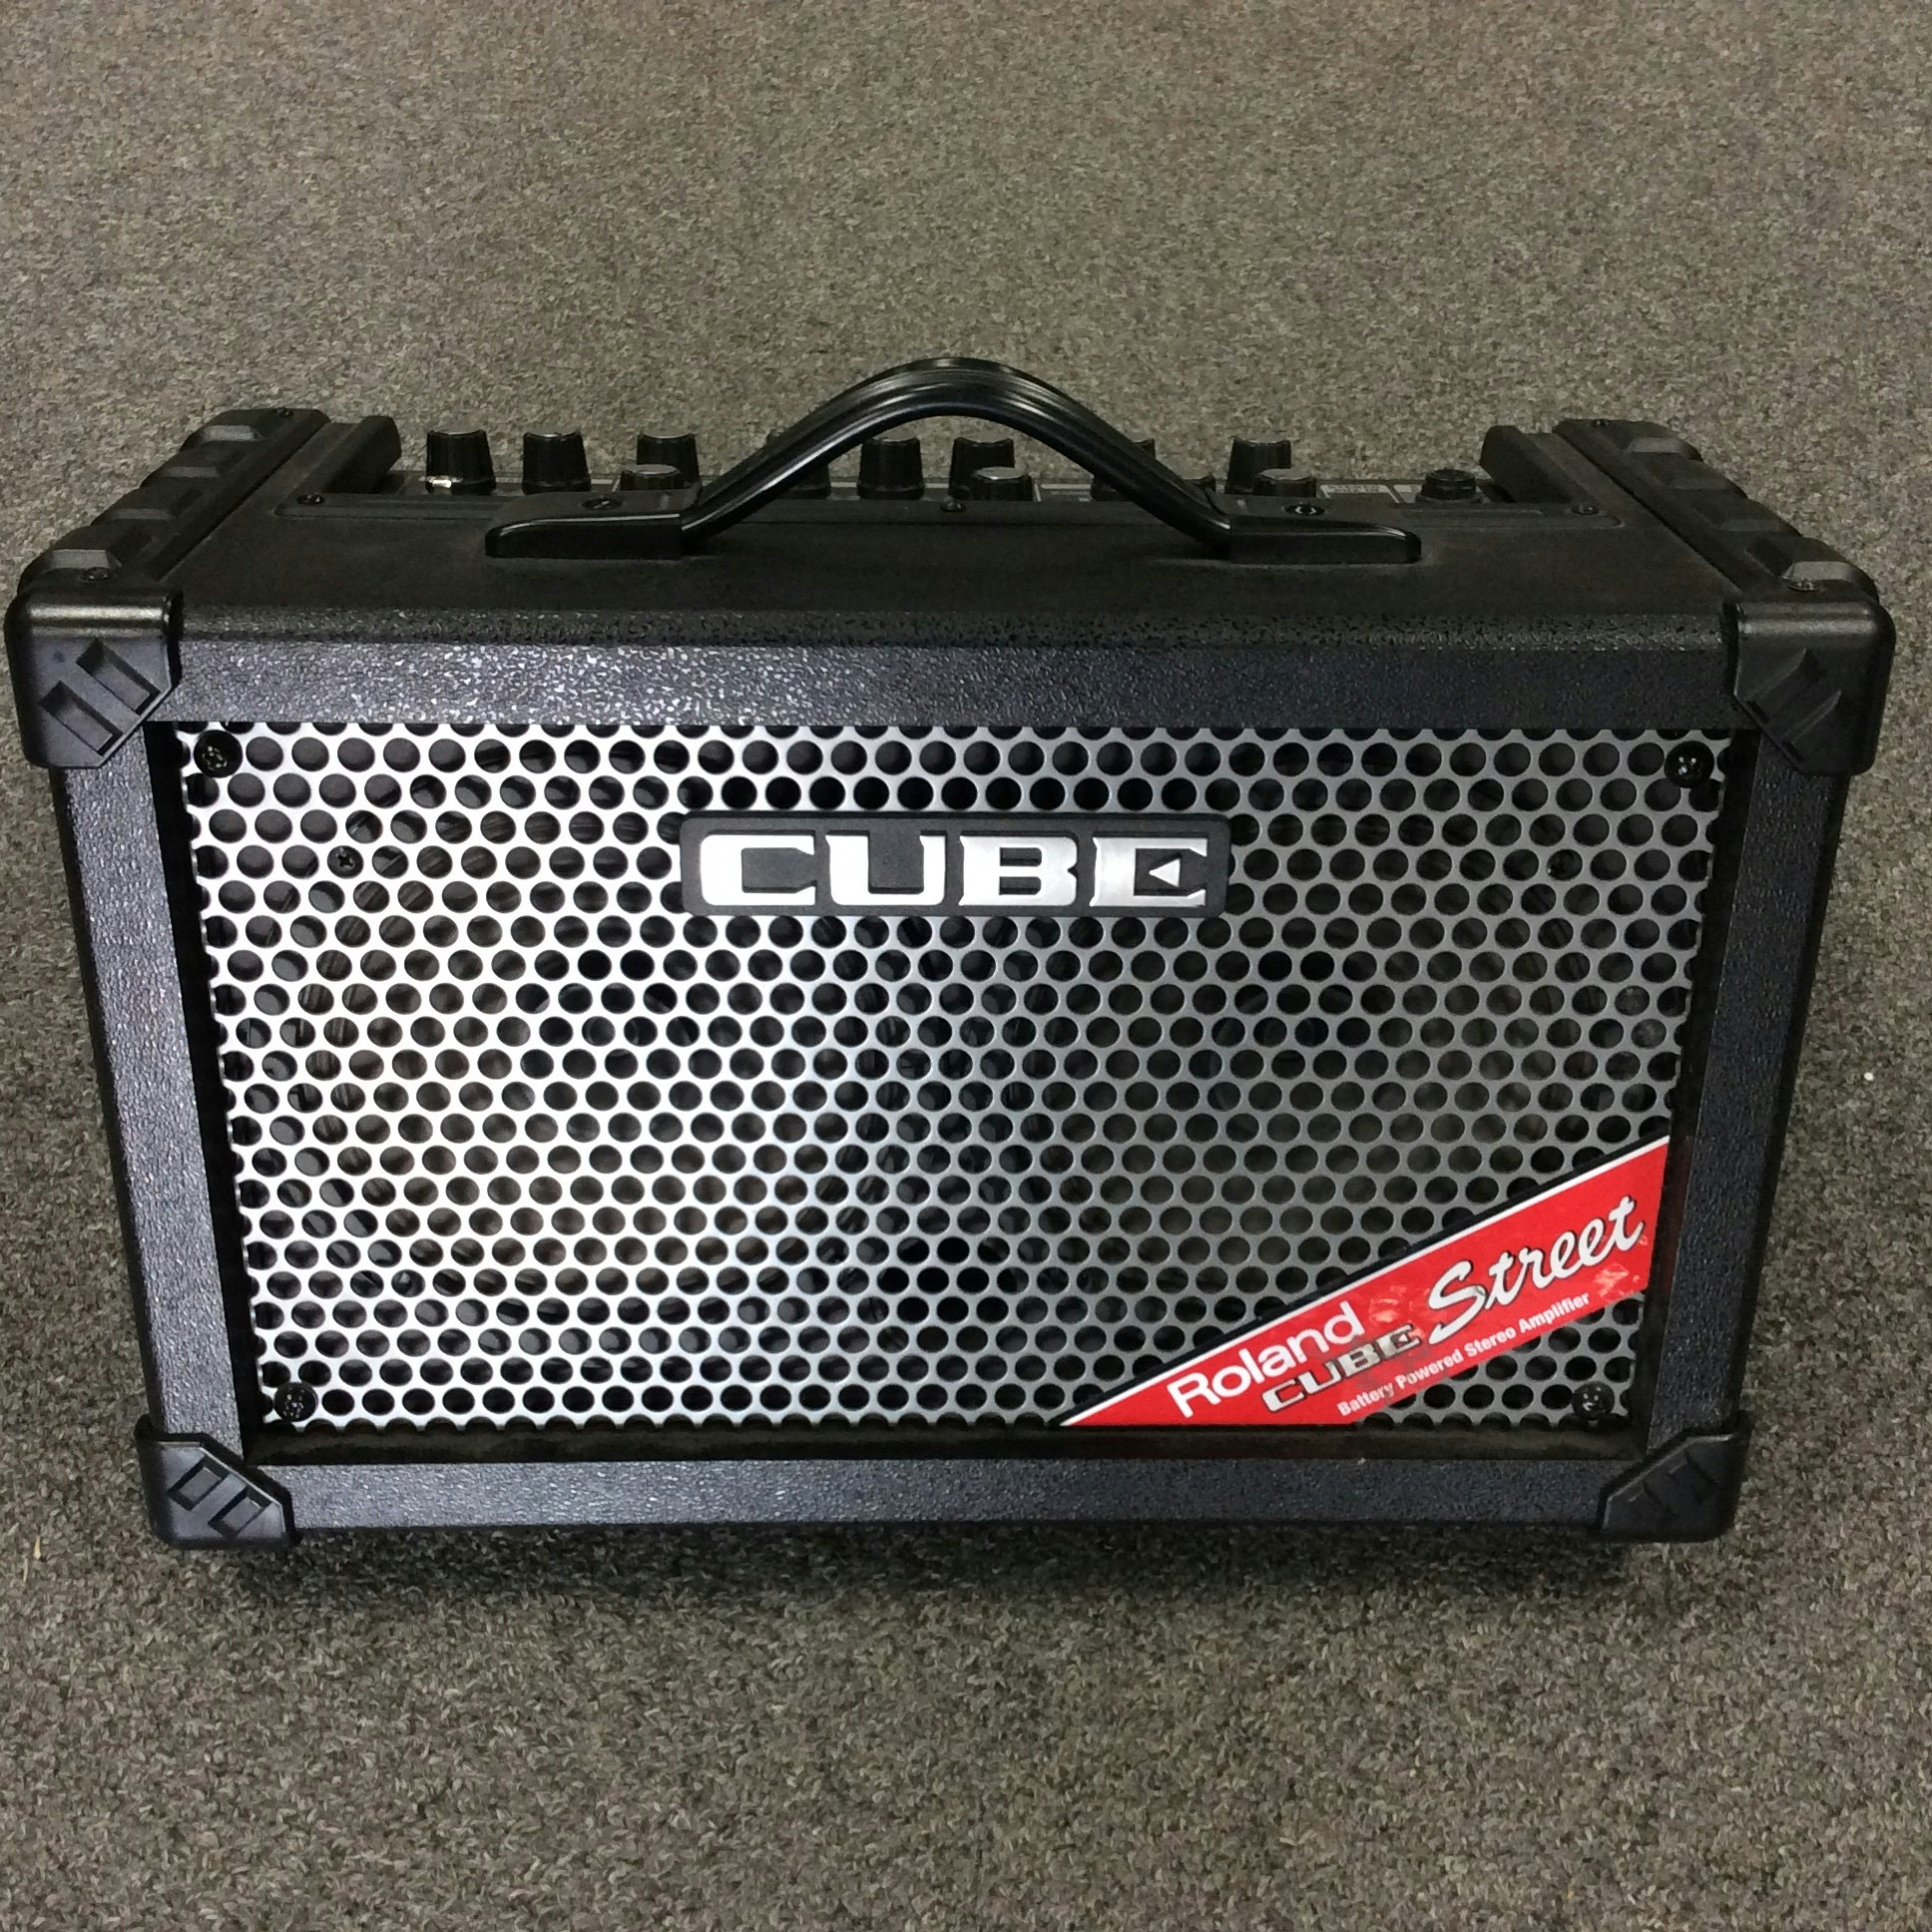 Used ROLAND CUBE STREET Solid State Guitar Amp Solid State Guitar Amps